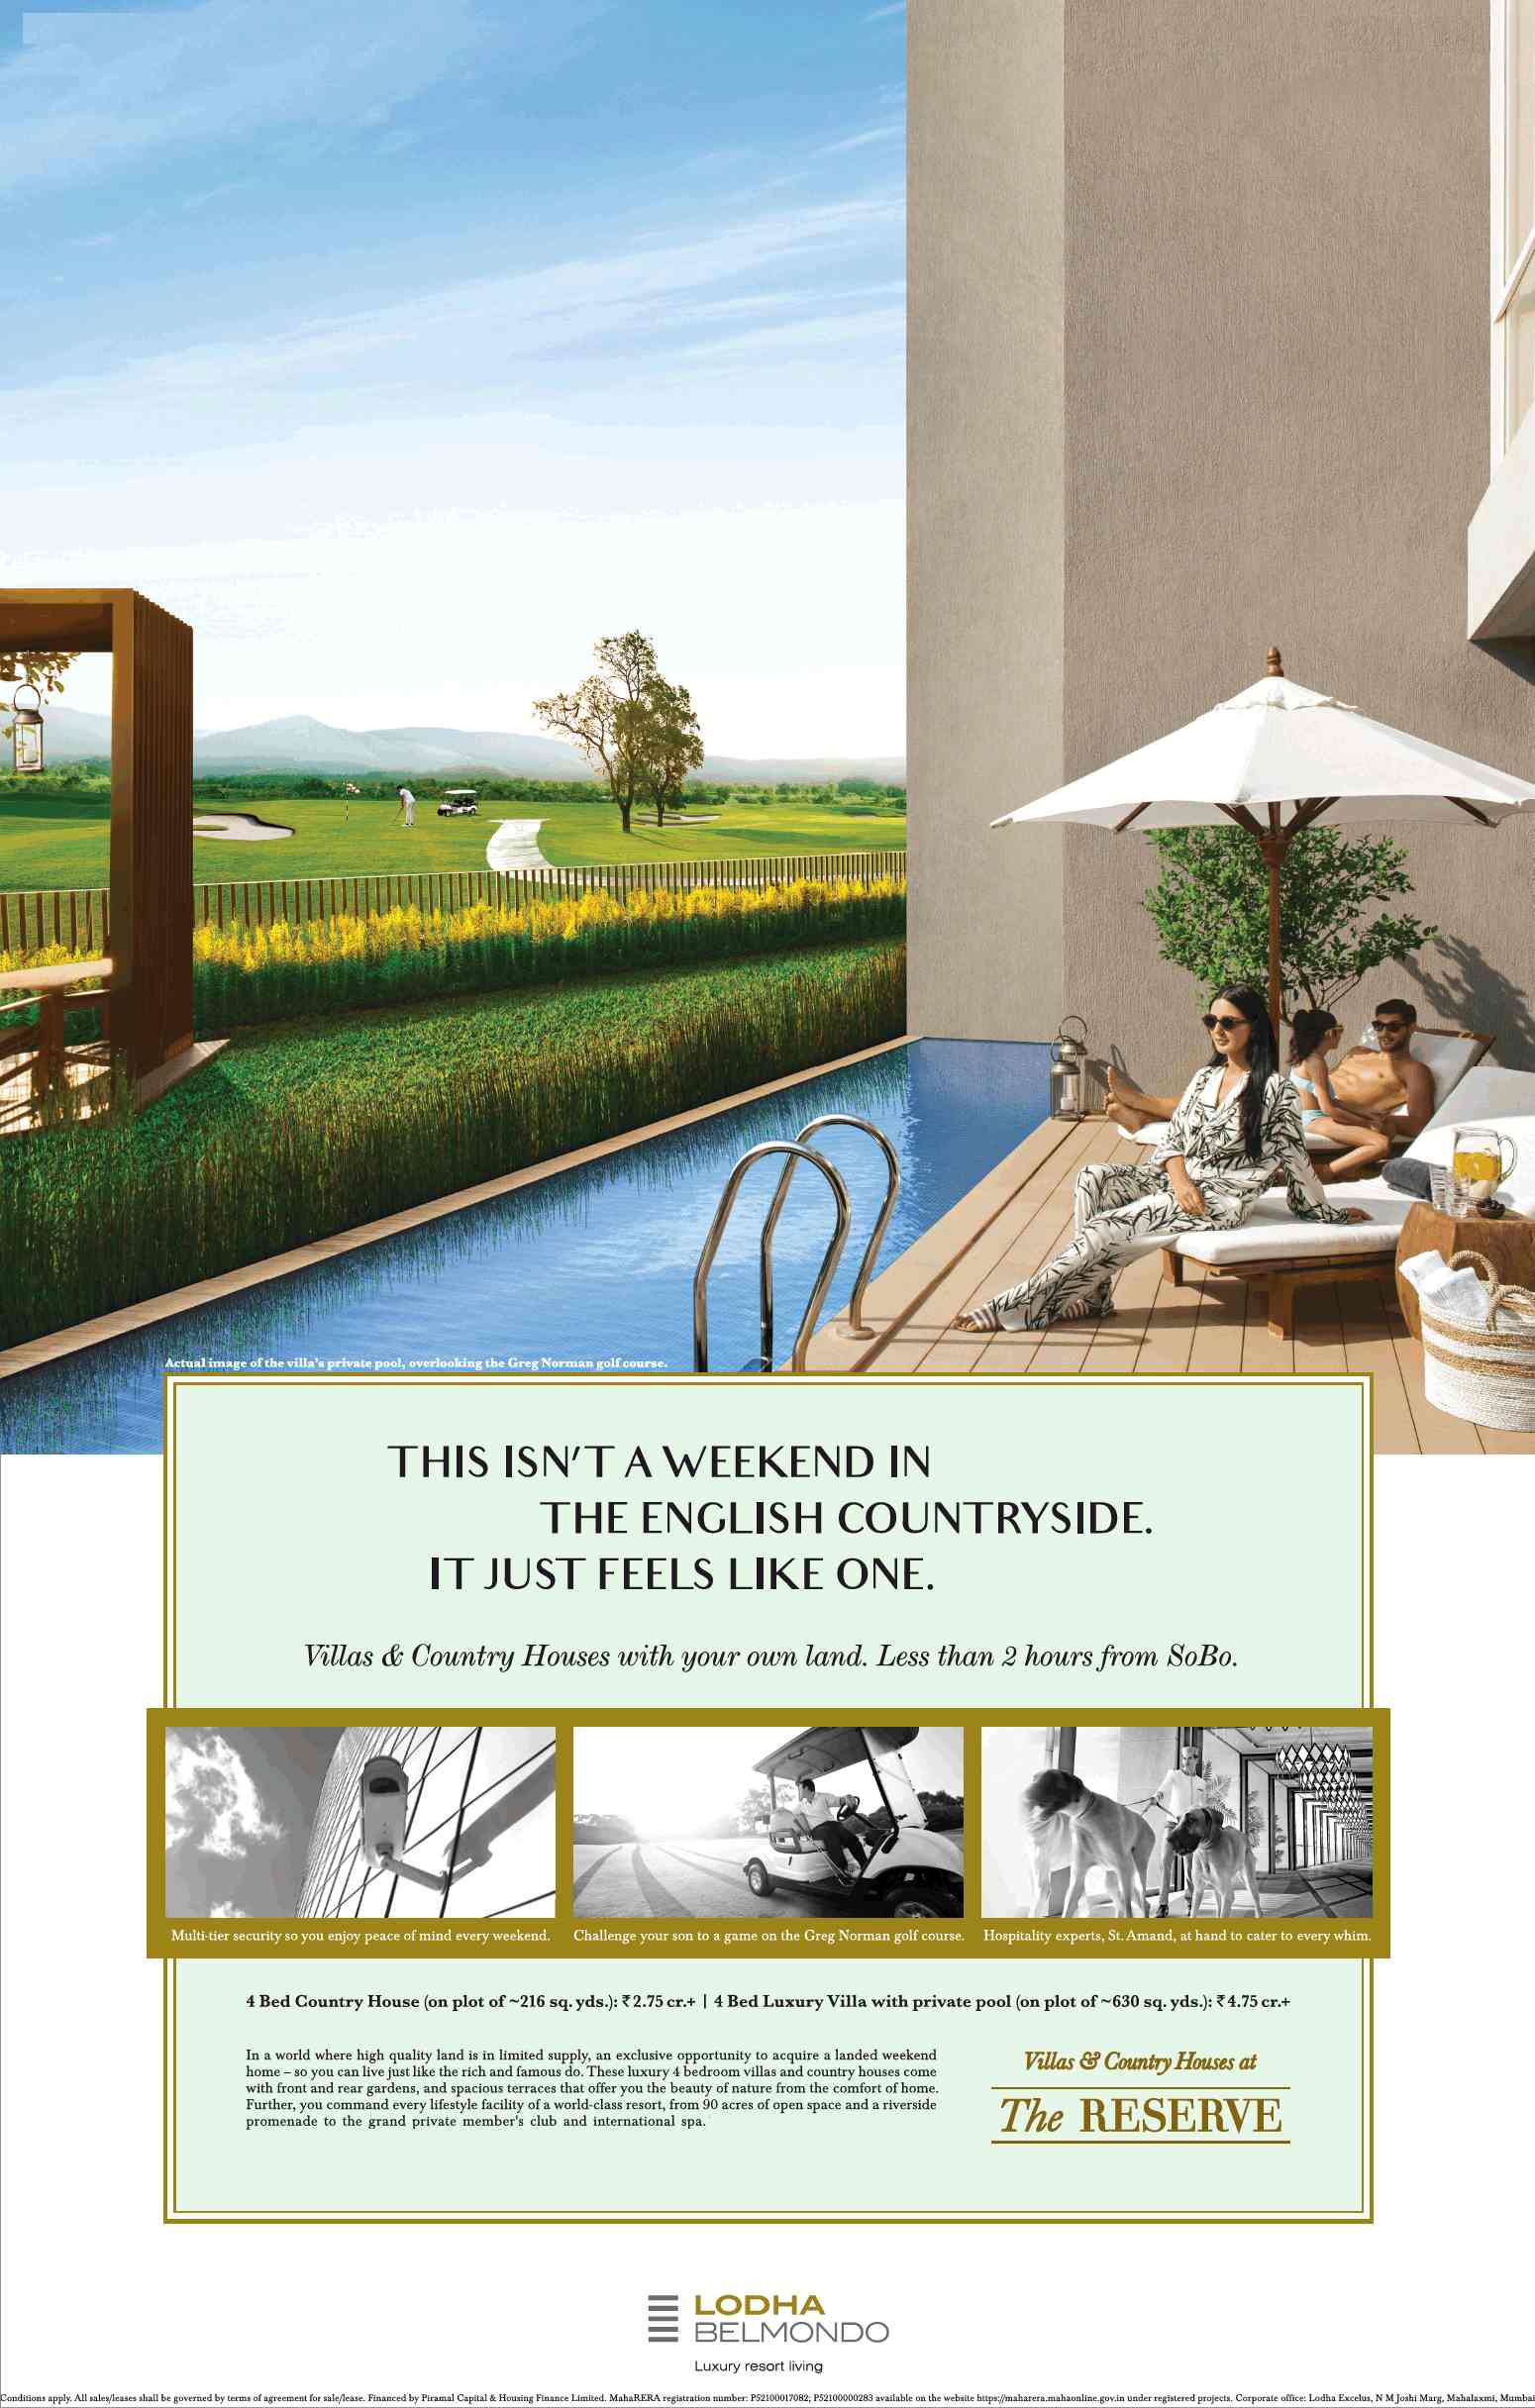 Villas & Country Houses with your own land at Lodha The Reserve in Pune Update